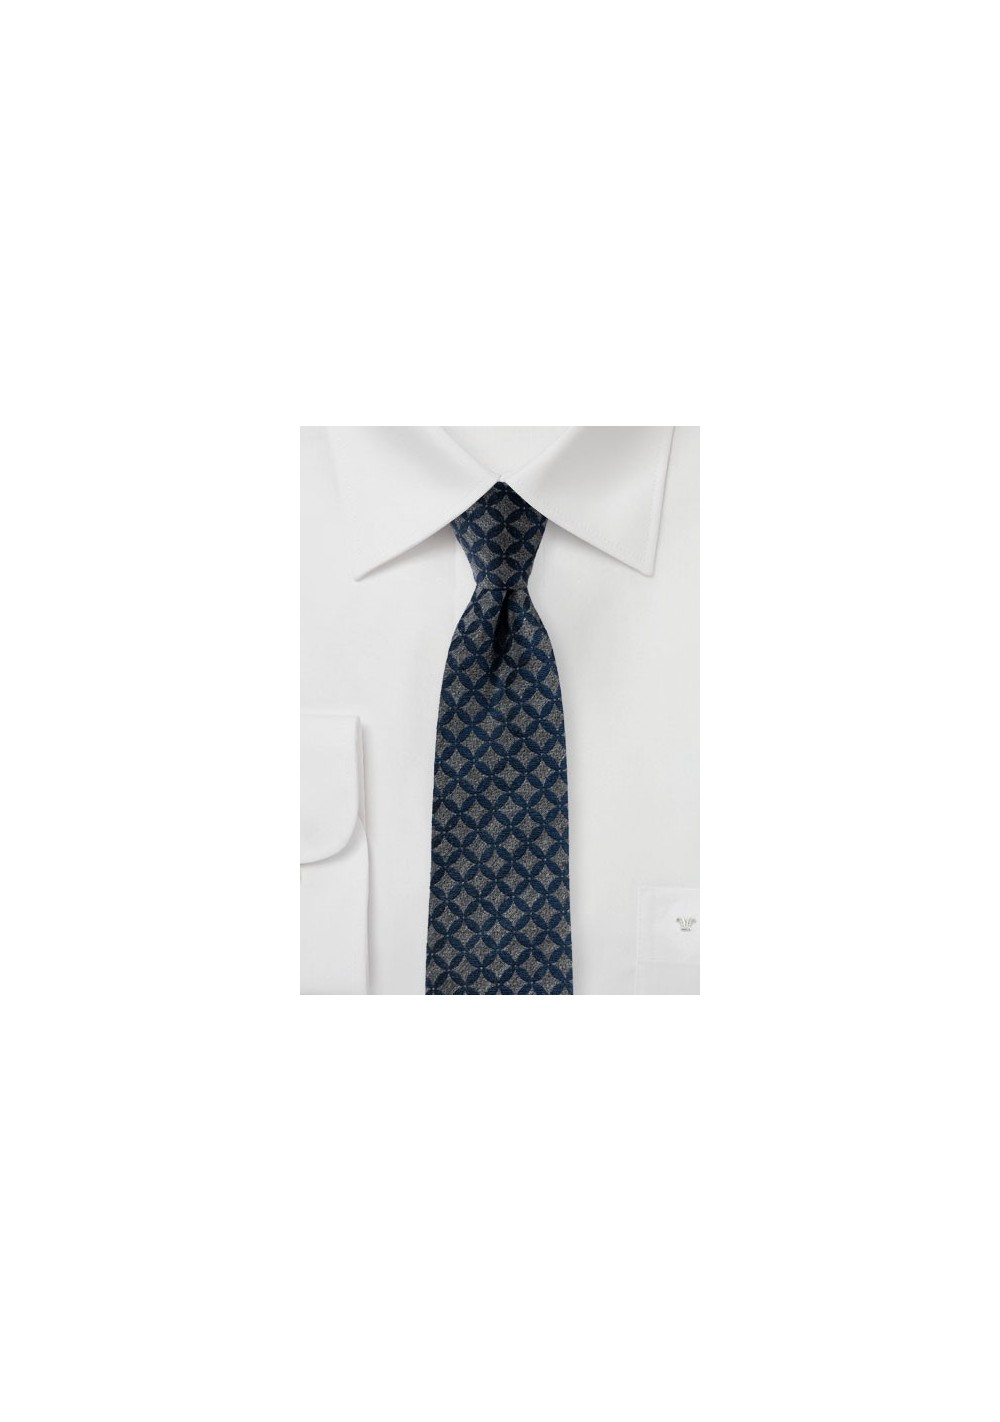 Trendy Patterned Skinny Tie in Navy and Gray